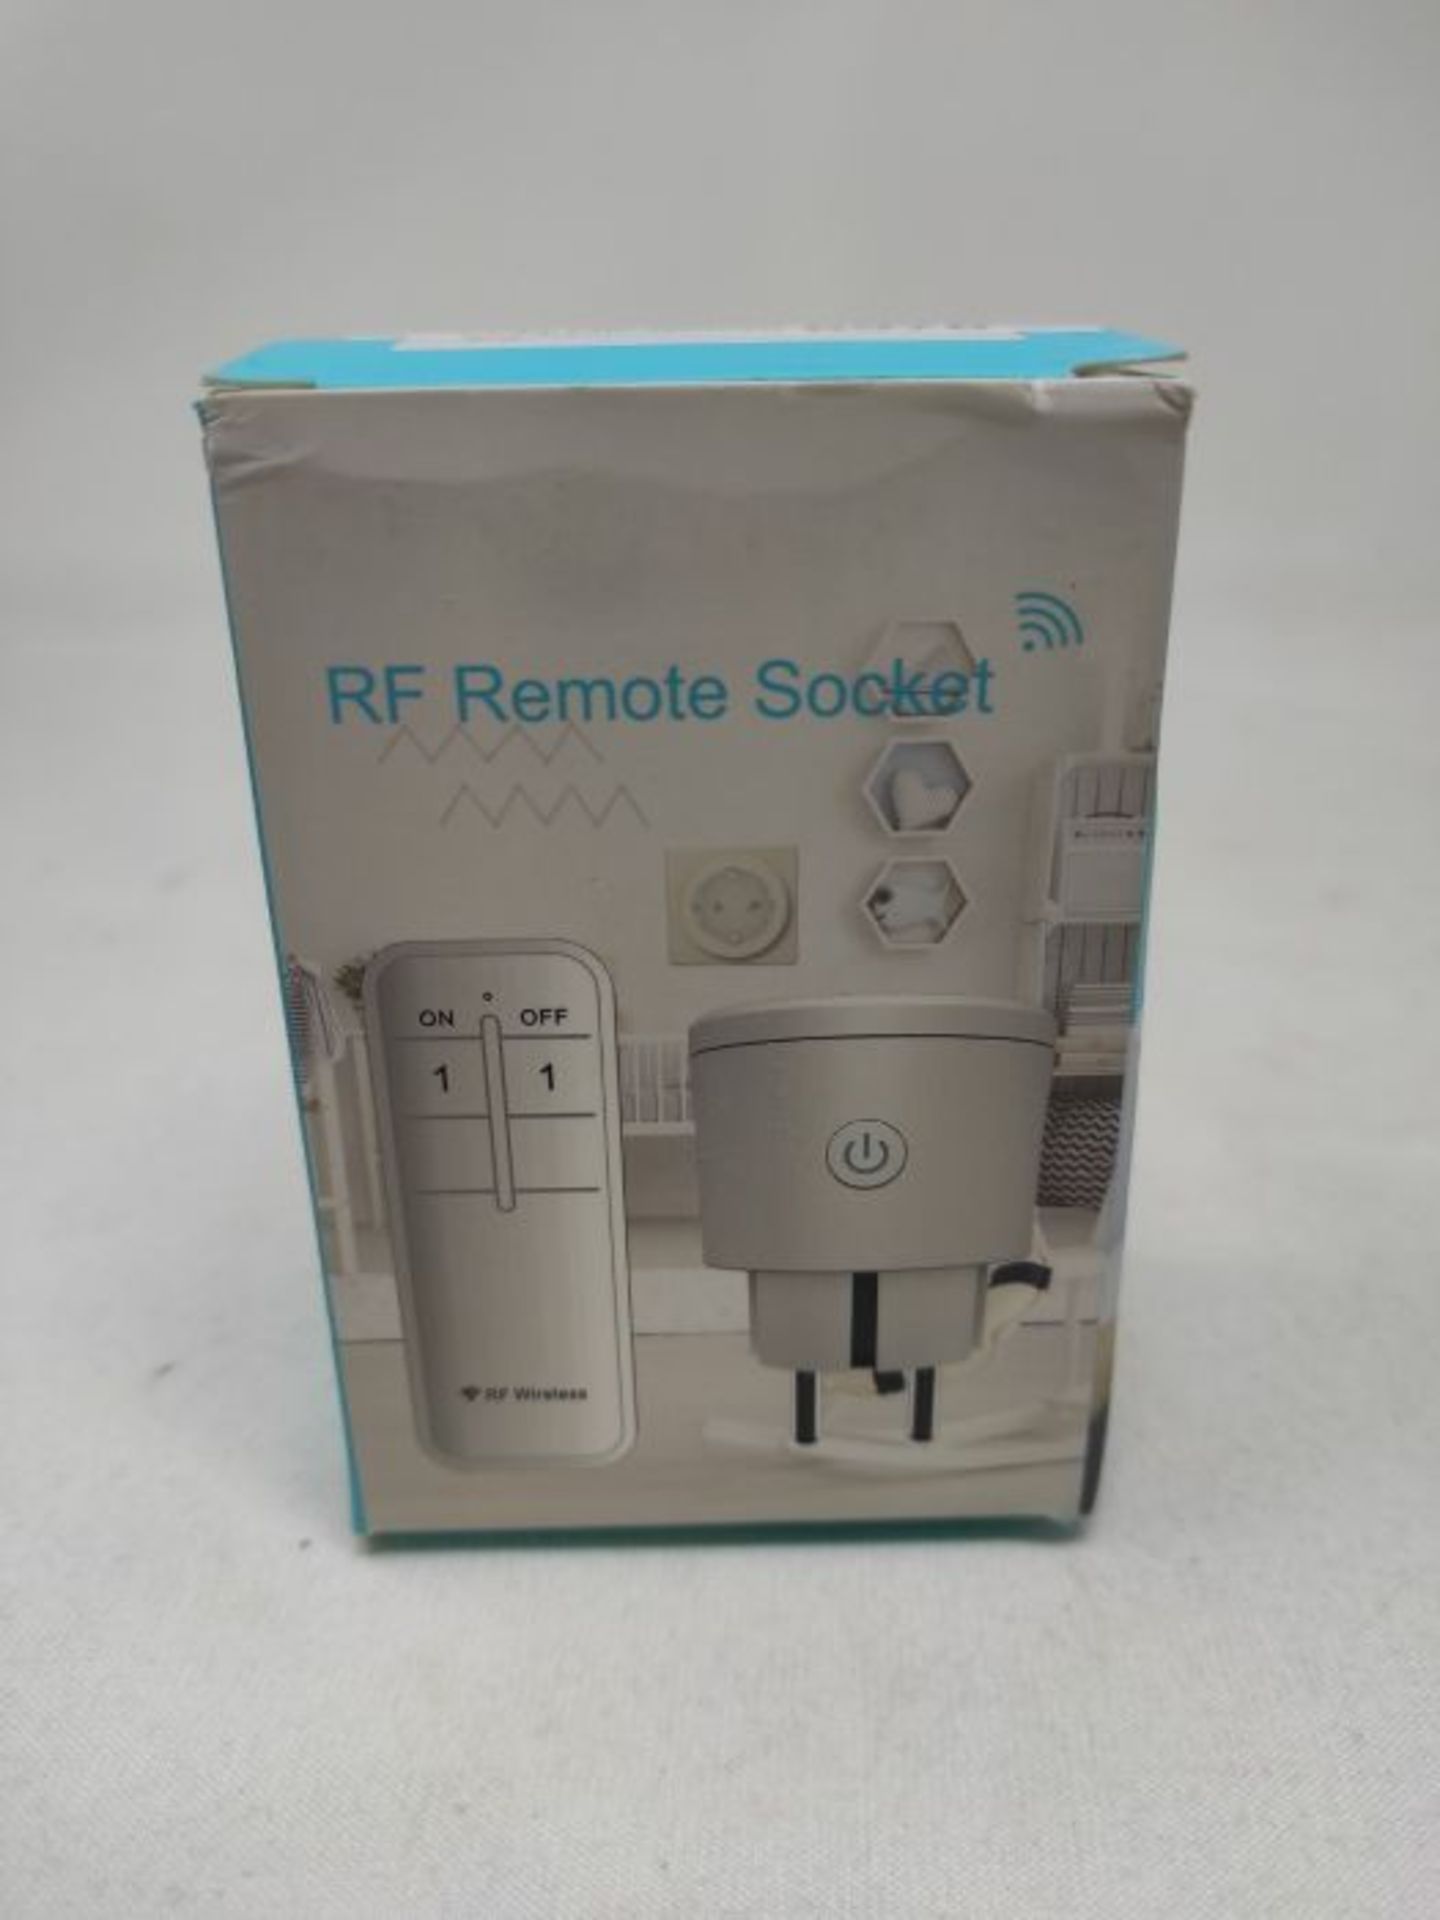 Radio Sockets with Remote Control, Radio Sockets, Simple Smart Socket, Remote Controll - Image 2 of 3